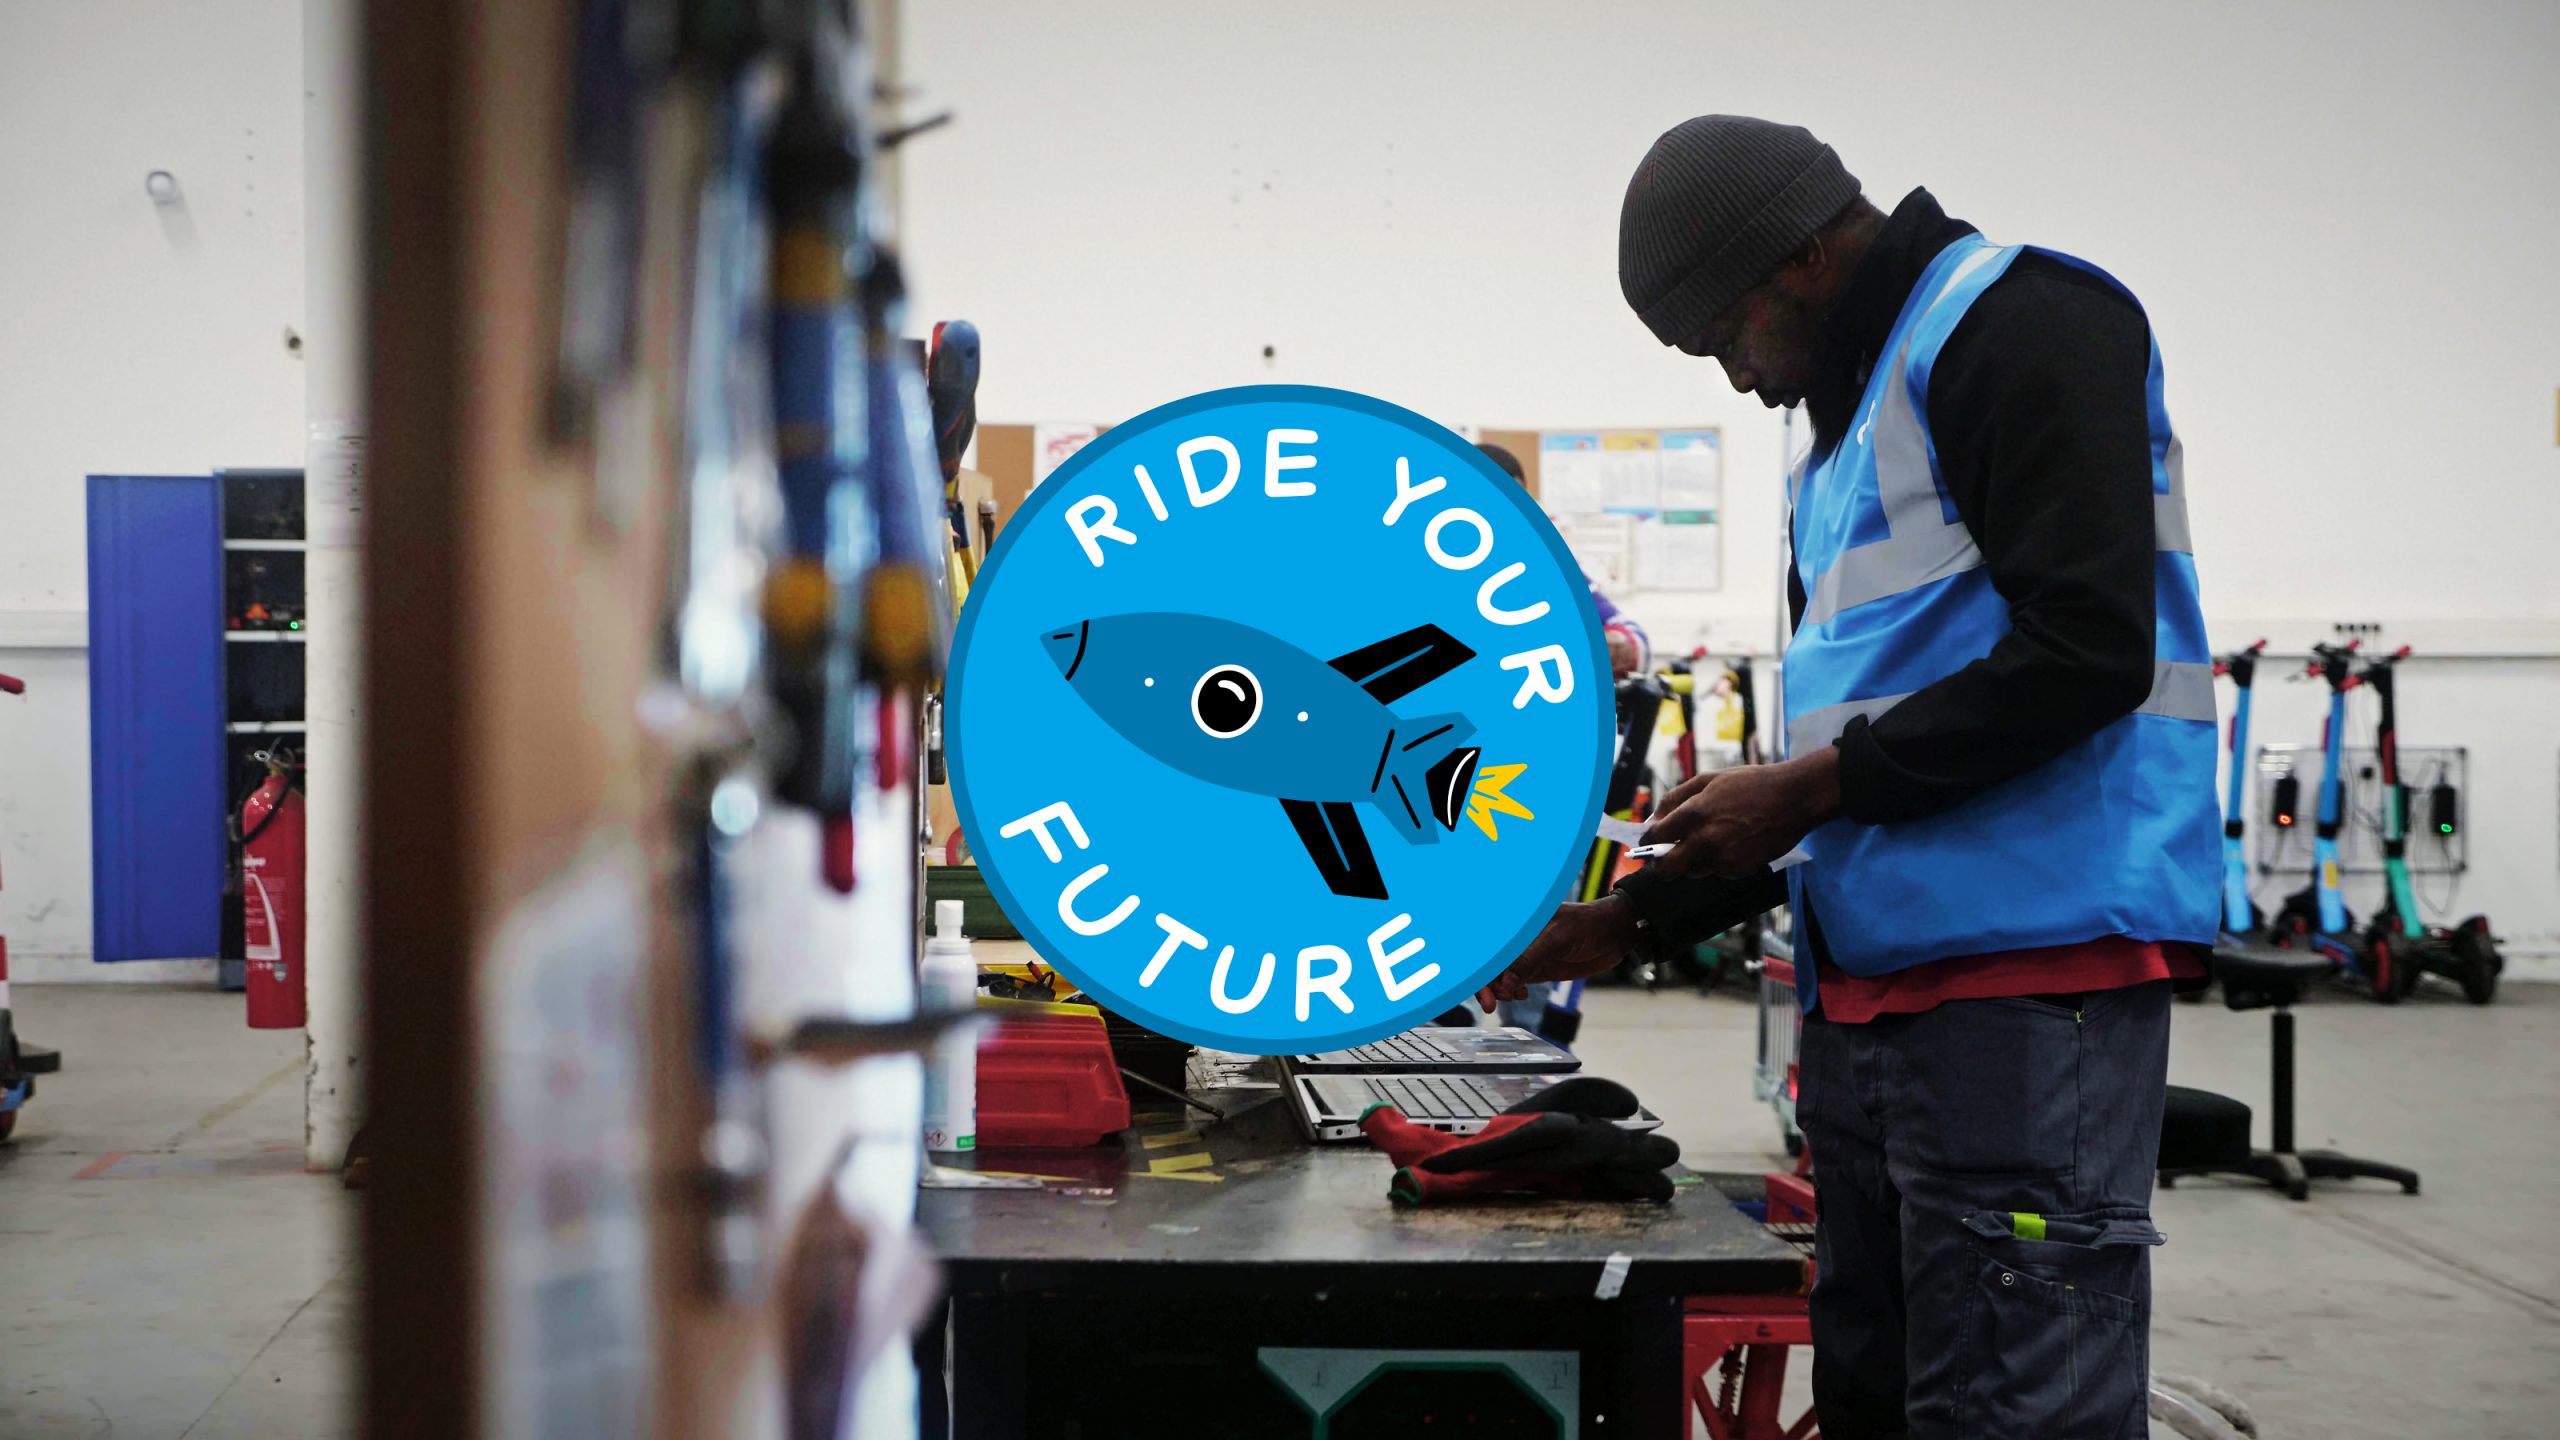 An image of a man working on a laptop in the Dott warehouse, with an illustration of a rocket encircled by the text ‘Ride Your Future’.